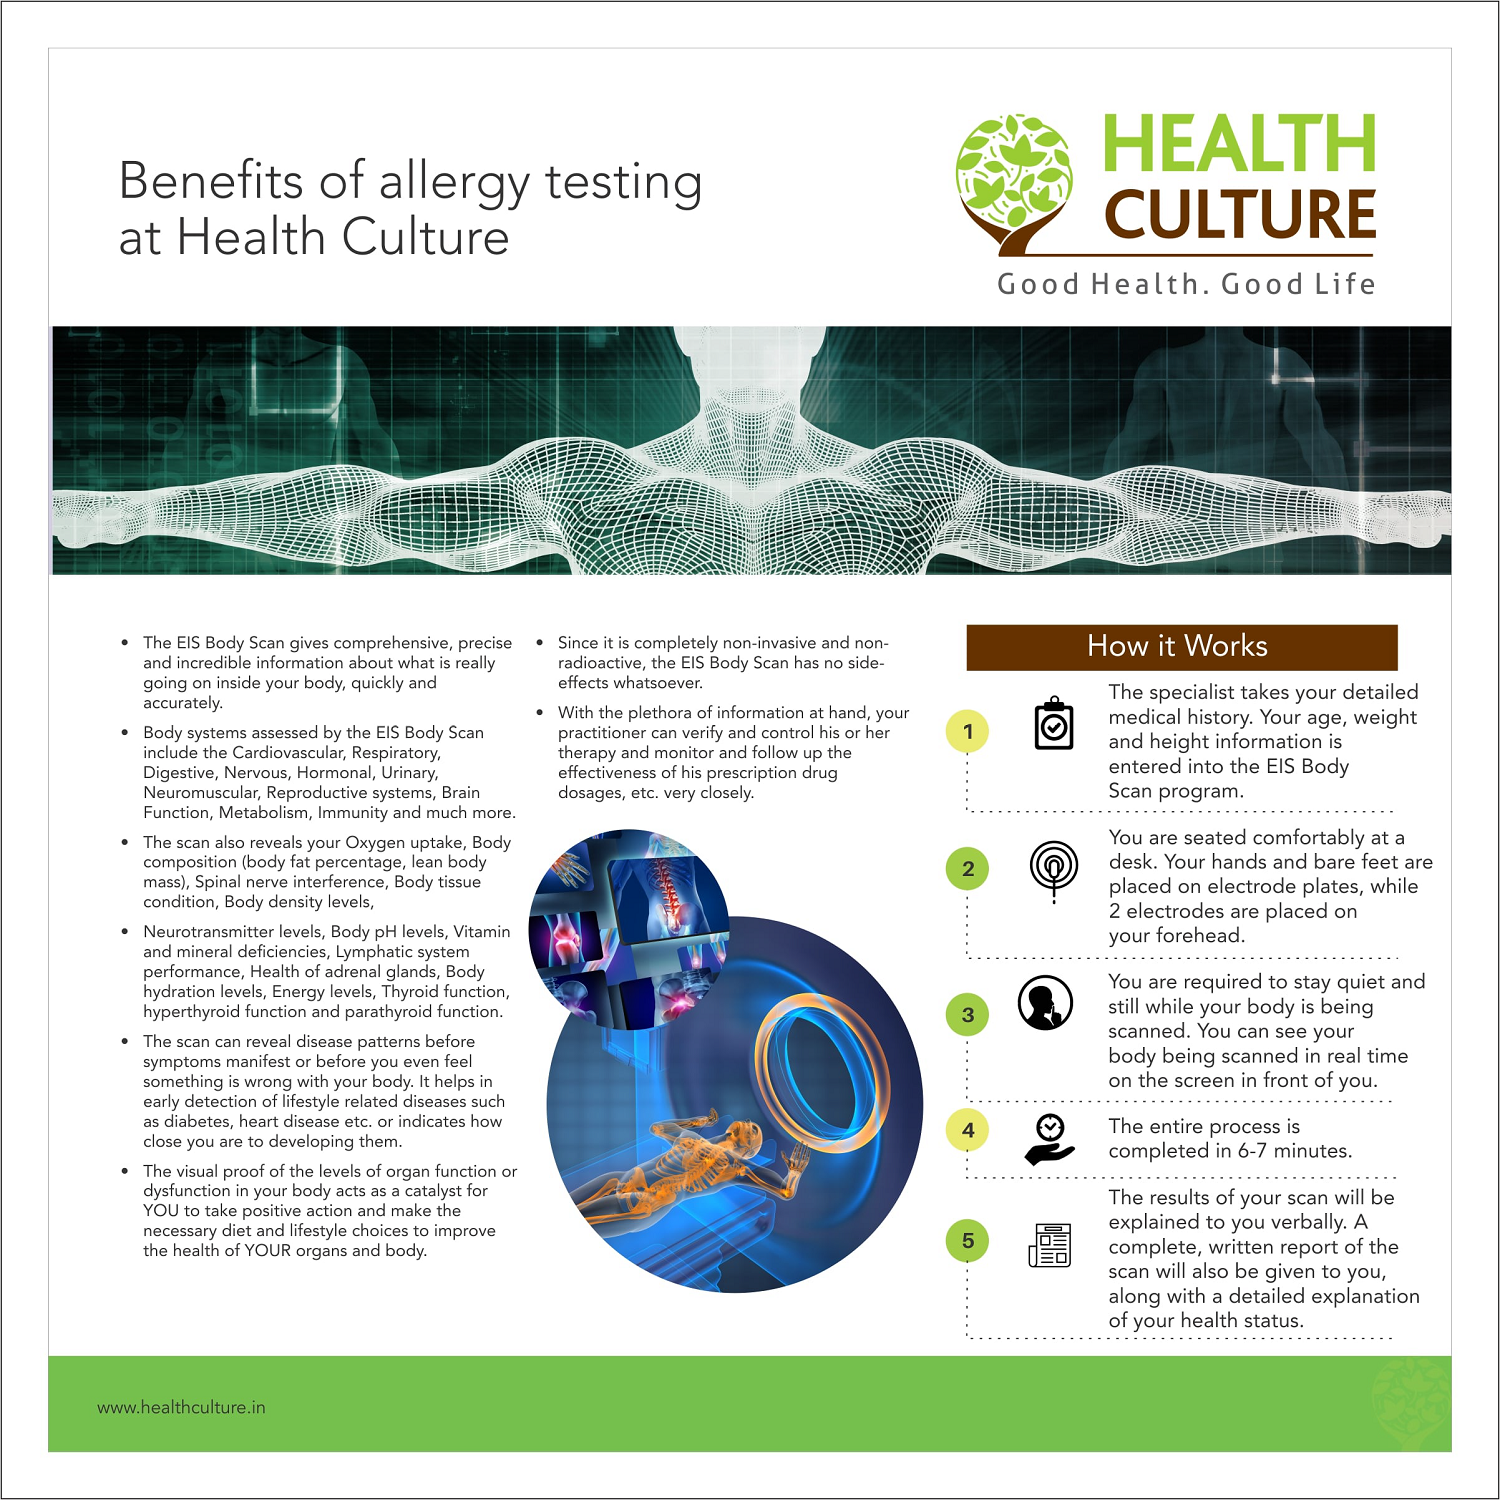 Benefits of allergy testing article - Health Culture